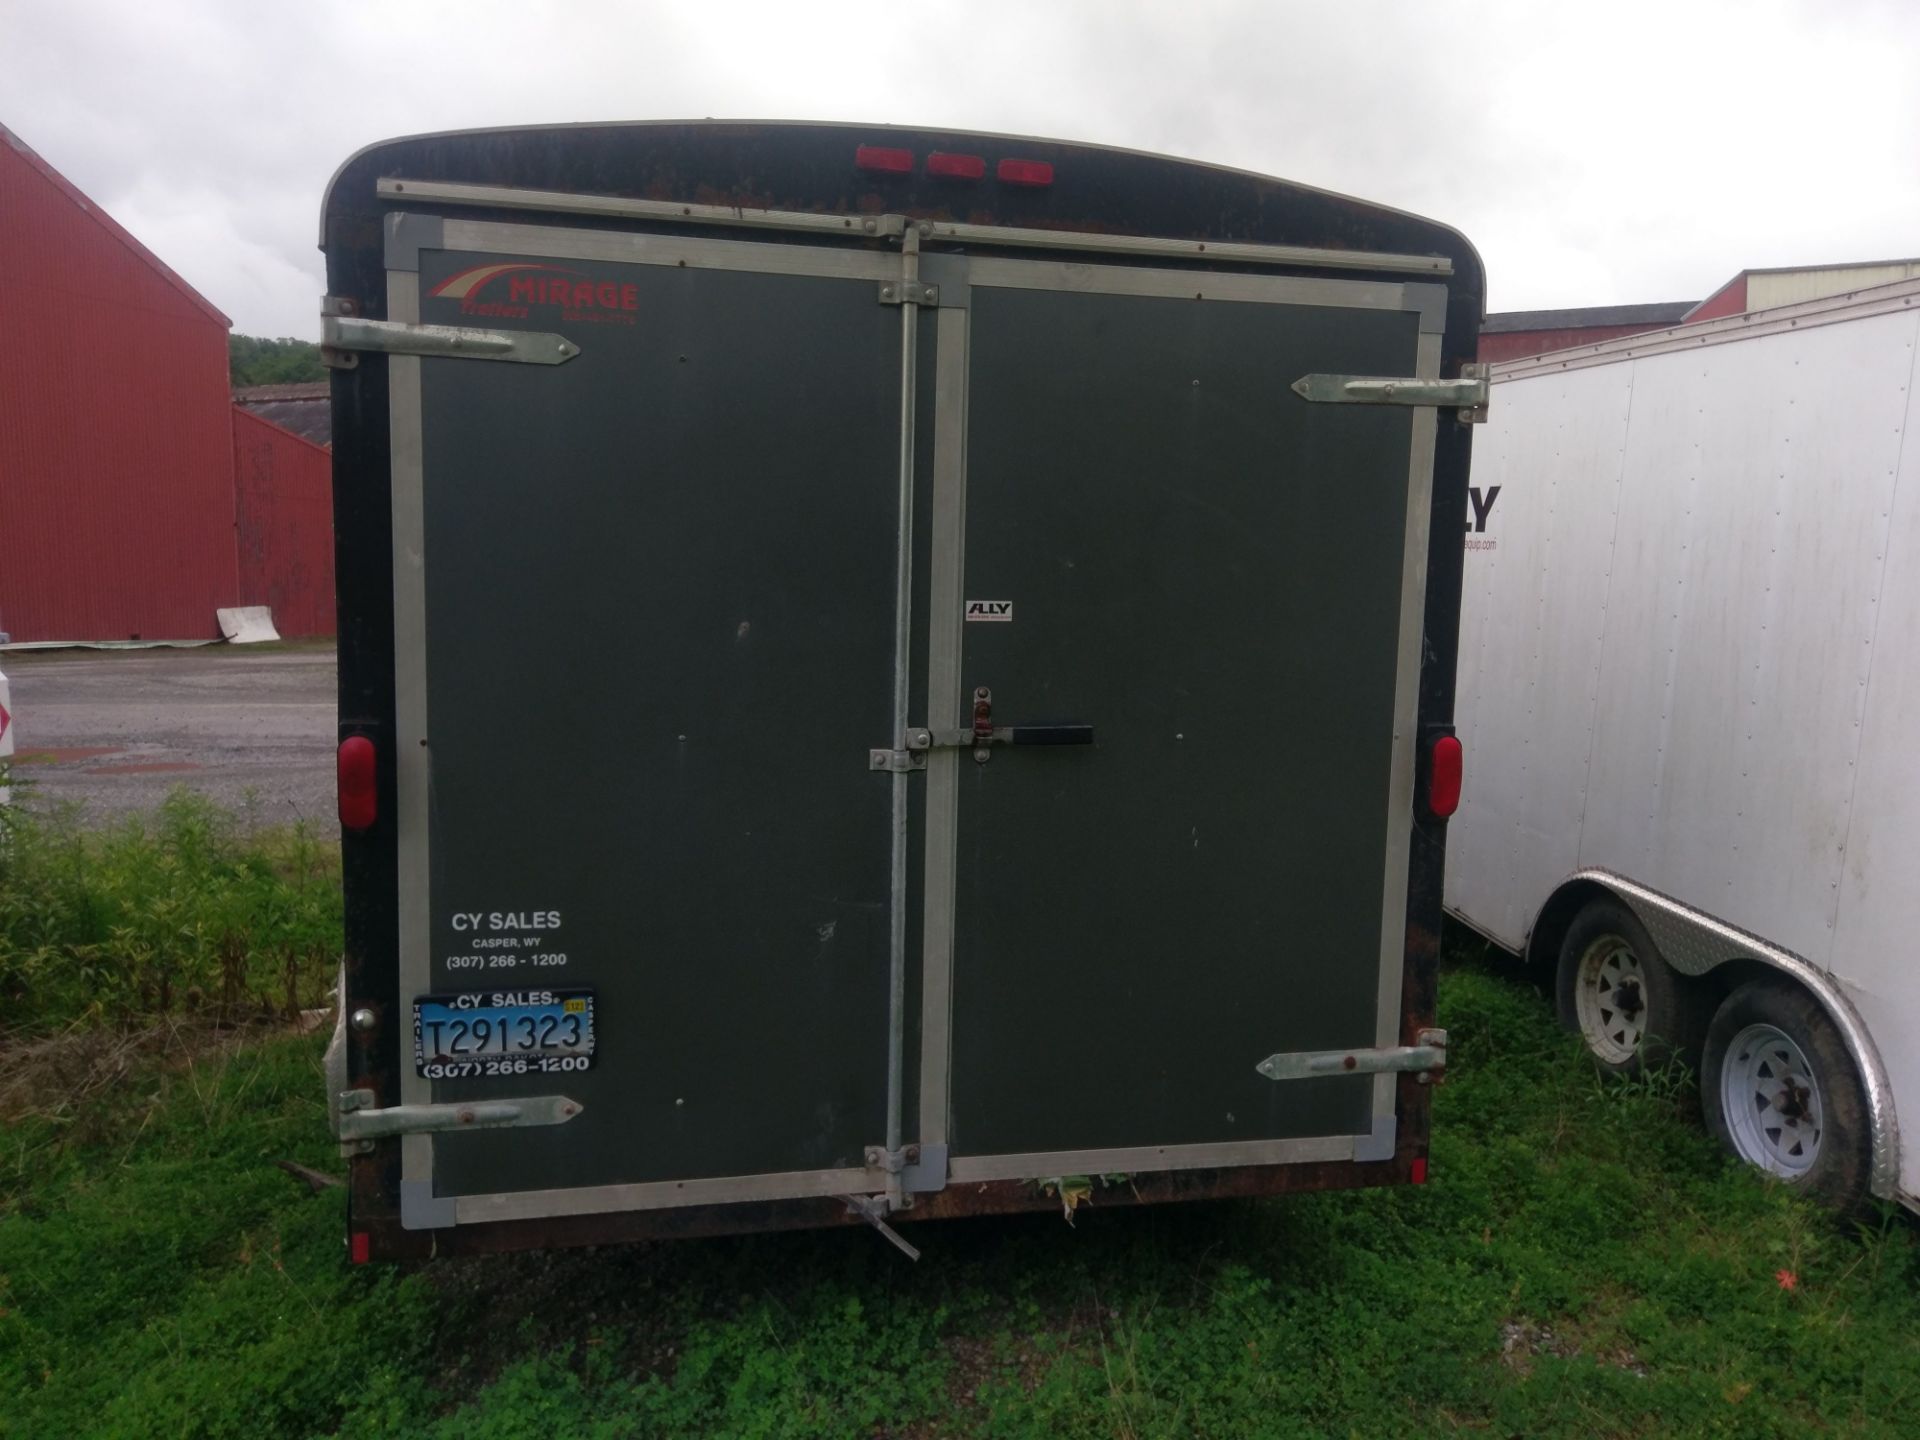 2011 MIRAGE TANDEM AXLE ENCLOSED TRAILER; VIN # 5M3BE1420B1047702, BALL HITCH, 7' X 15', DOUBLE REAR - Image 3 of 5